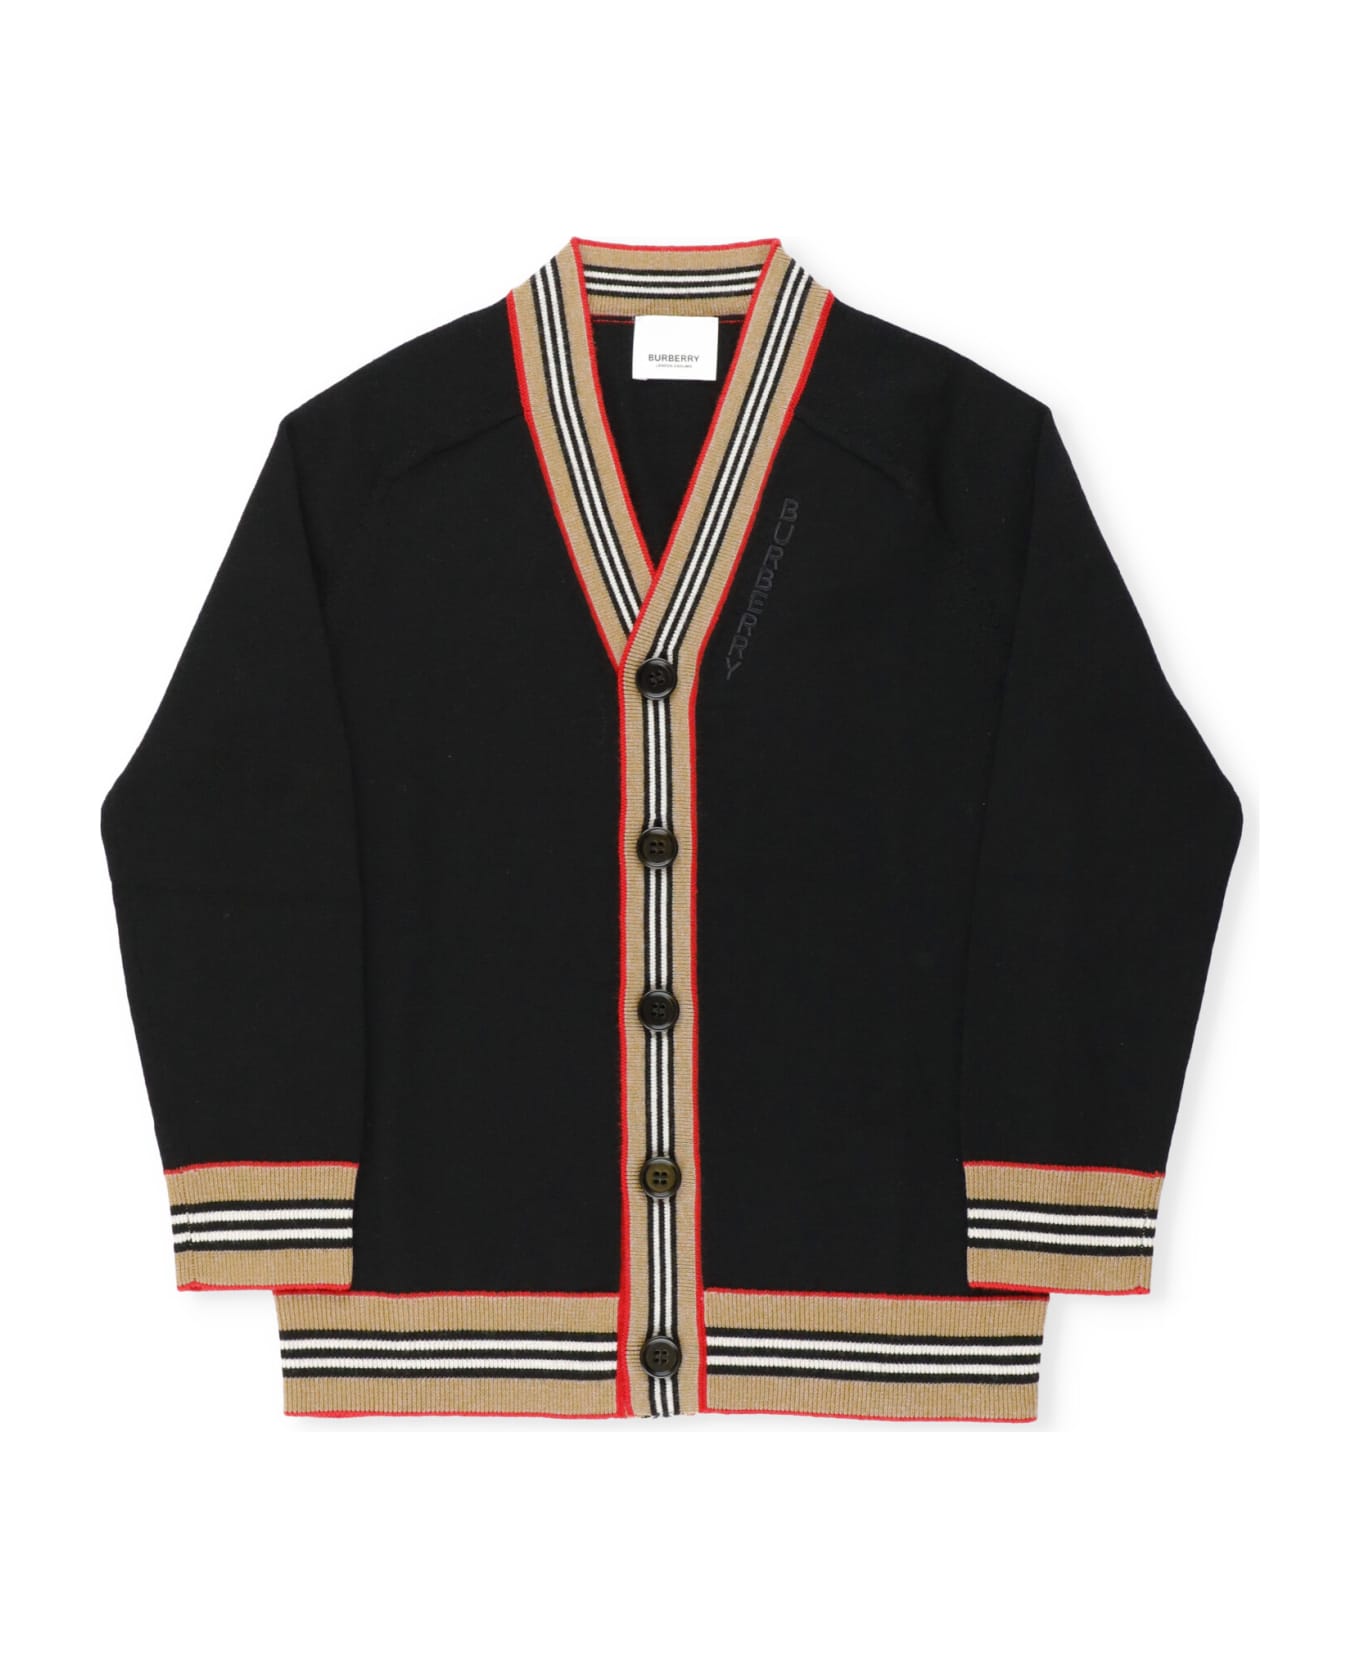 Burberry Wool Knitted Cardigan - BLACK